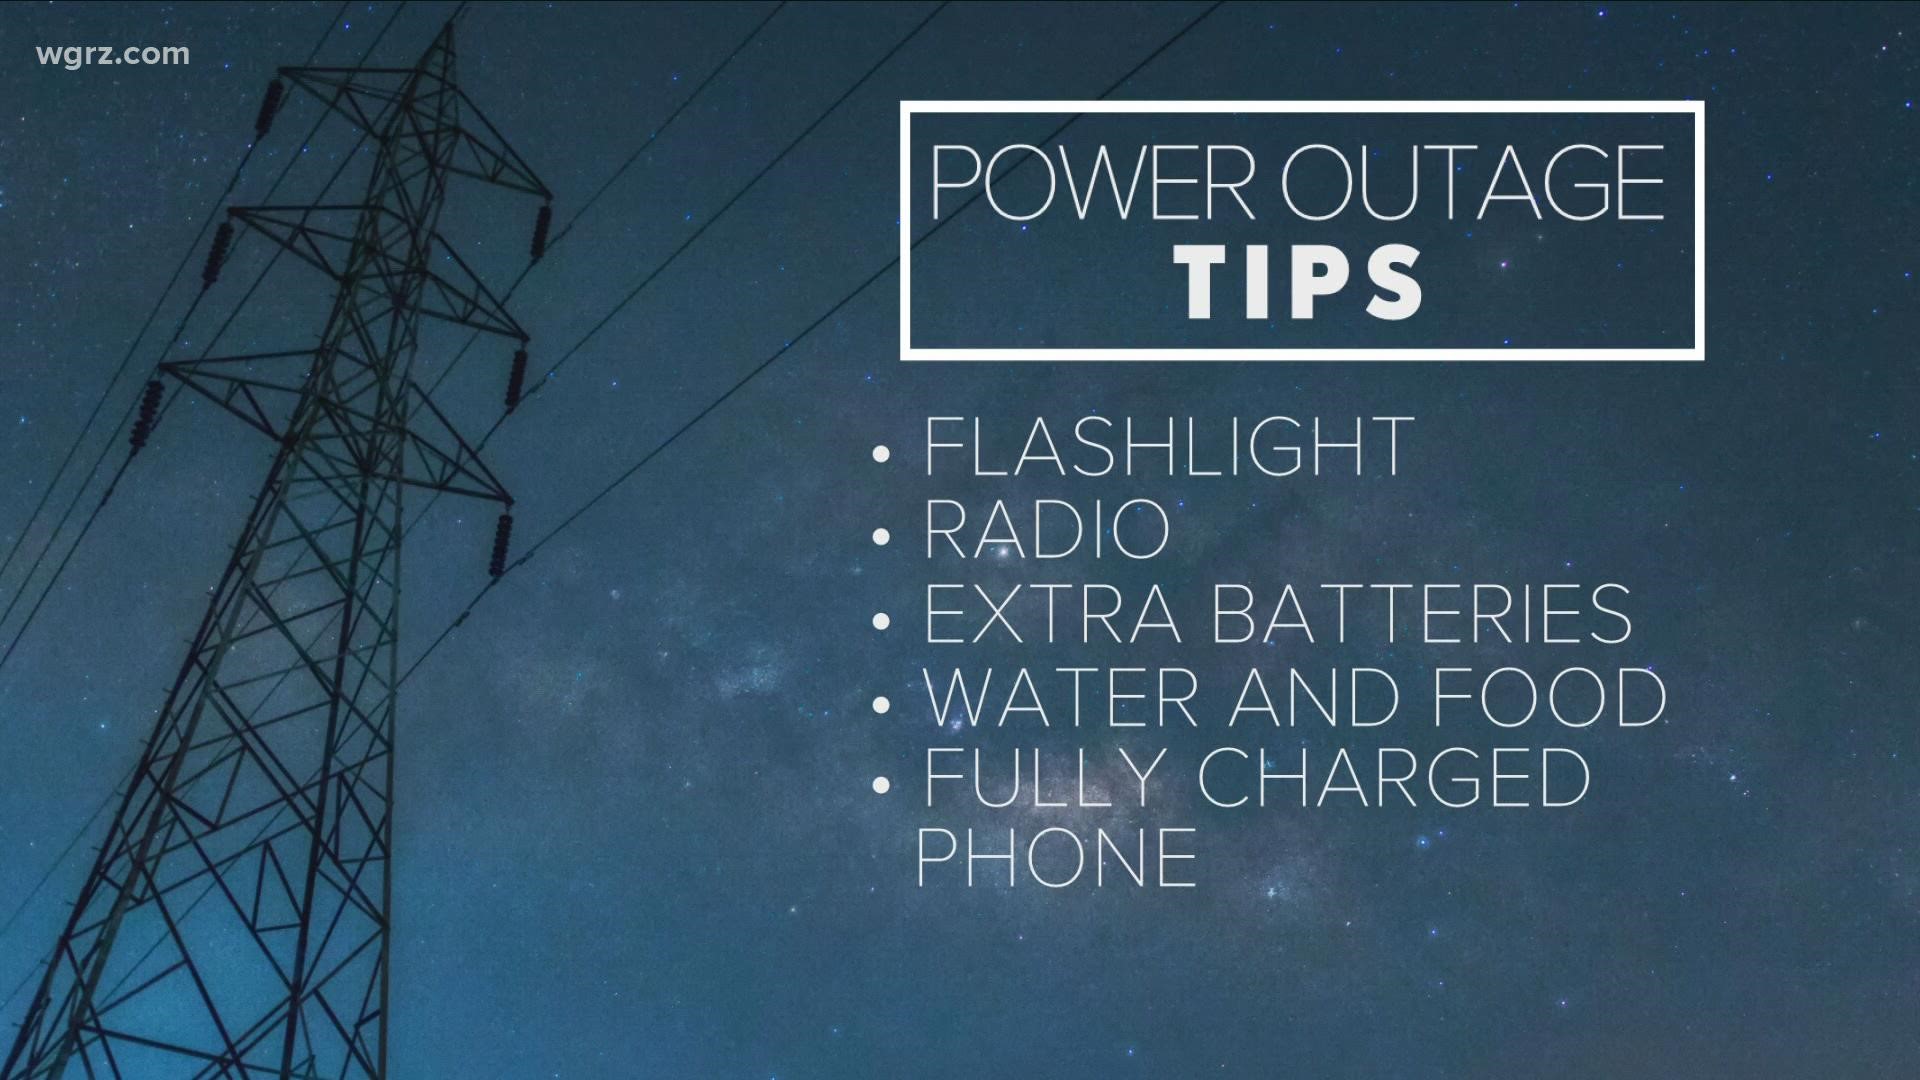 National Grid is reminding people the do's and don'ts when it comes to power outages.